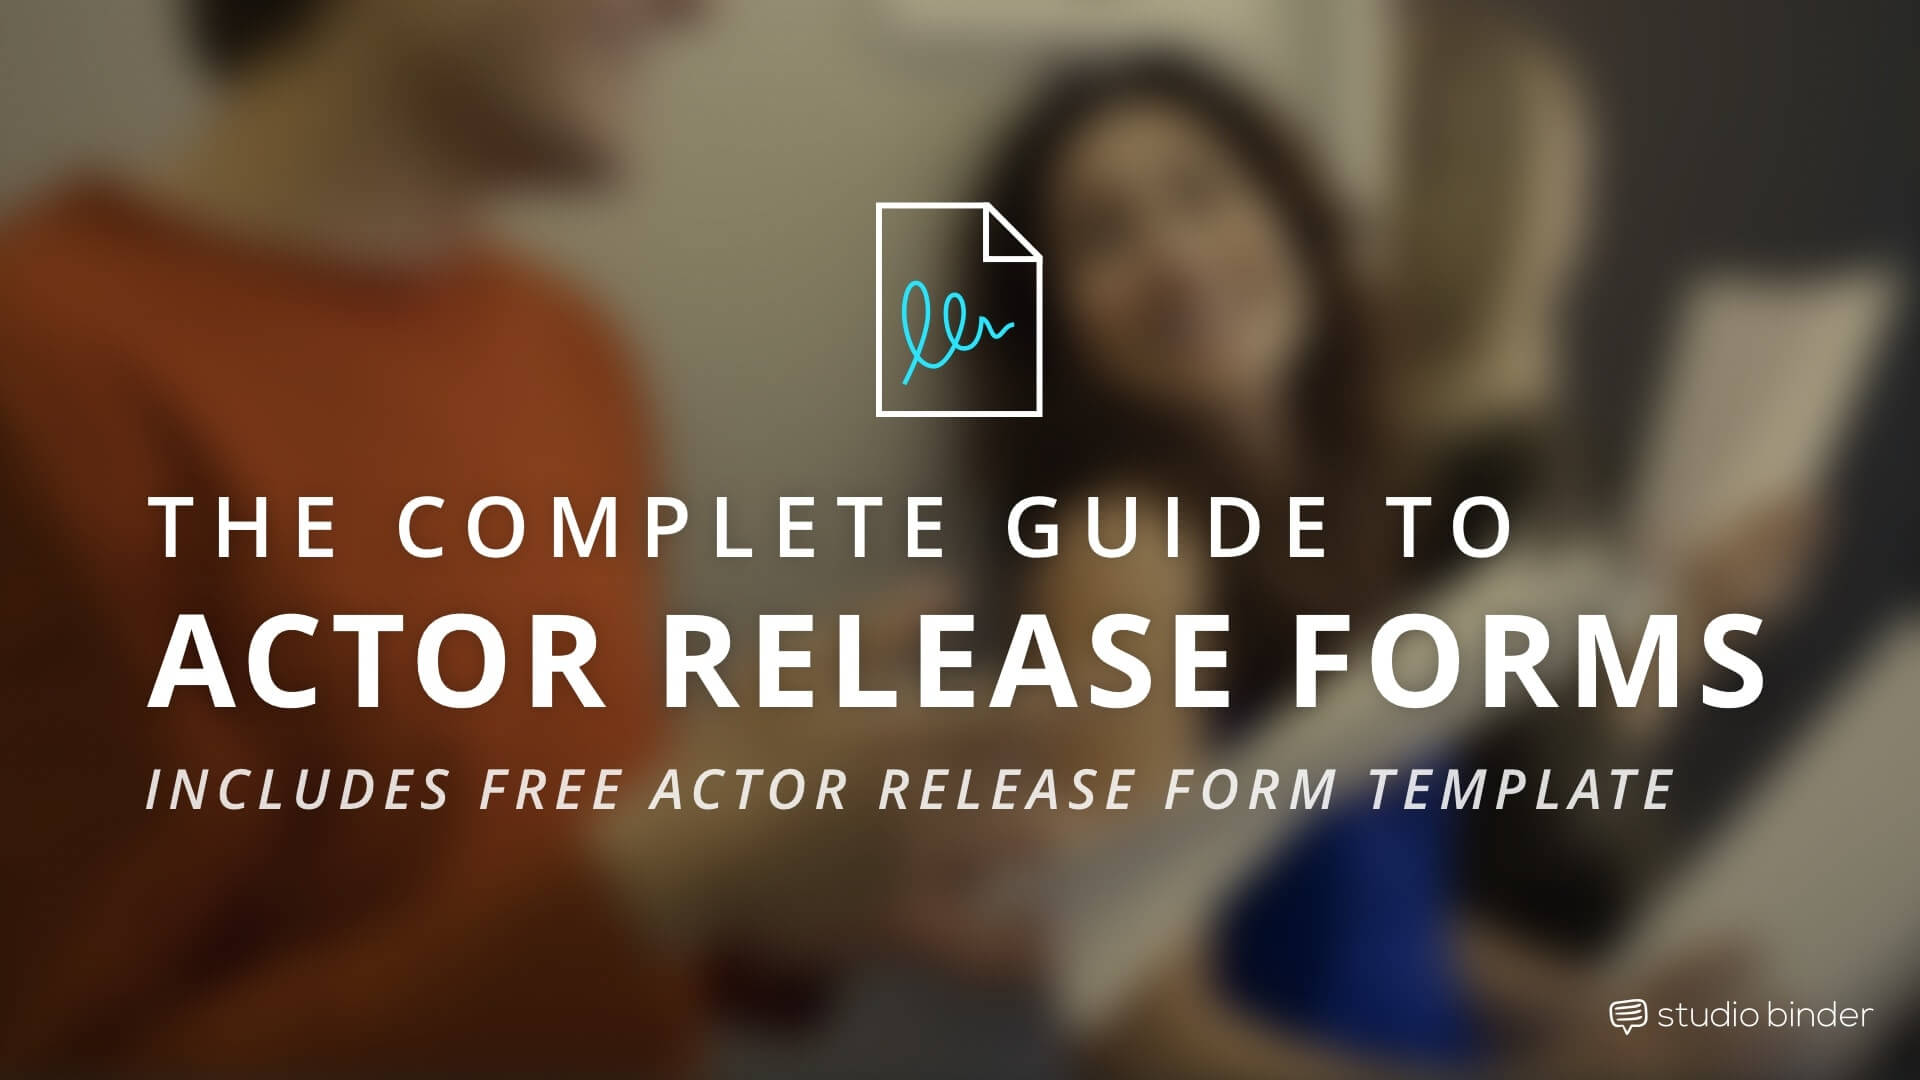 The Complete Guide to Actor Release Forms - StudioBinder Featured